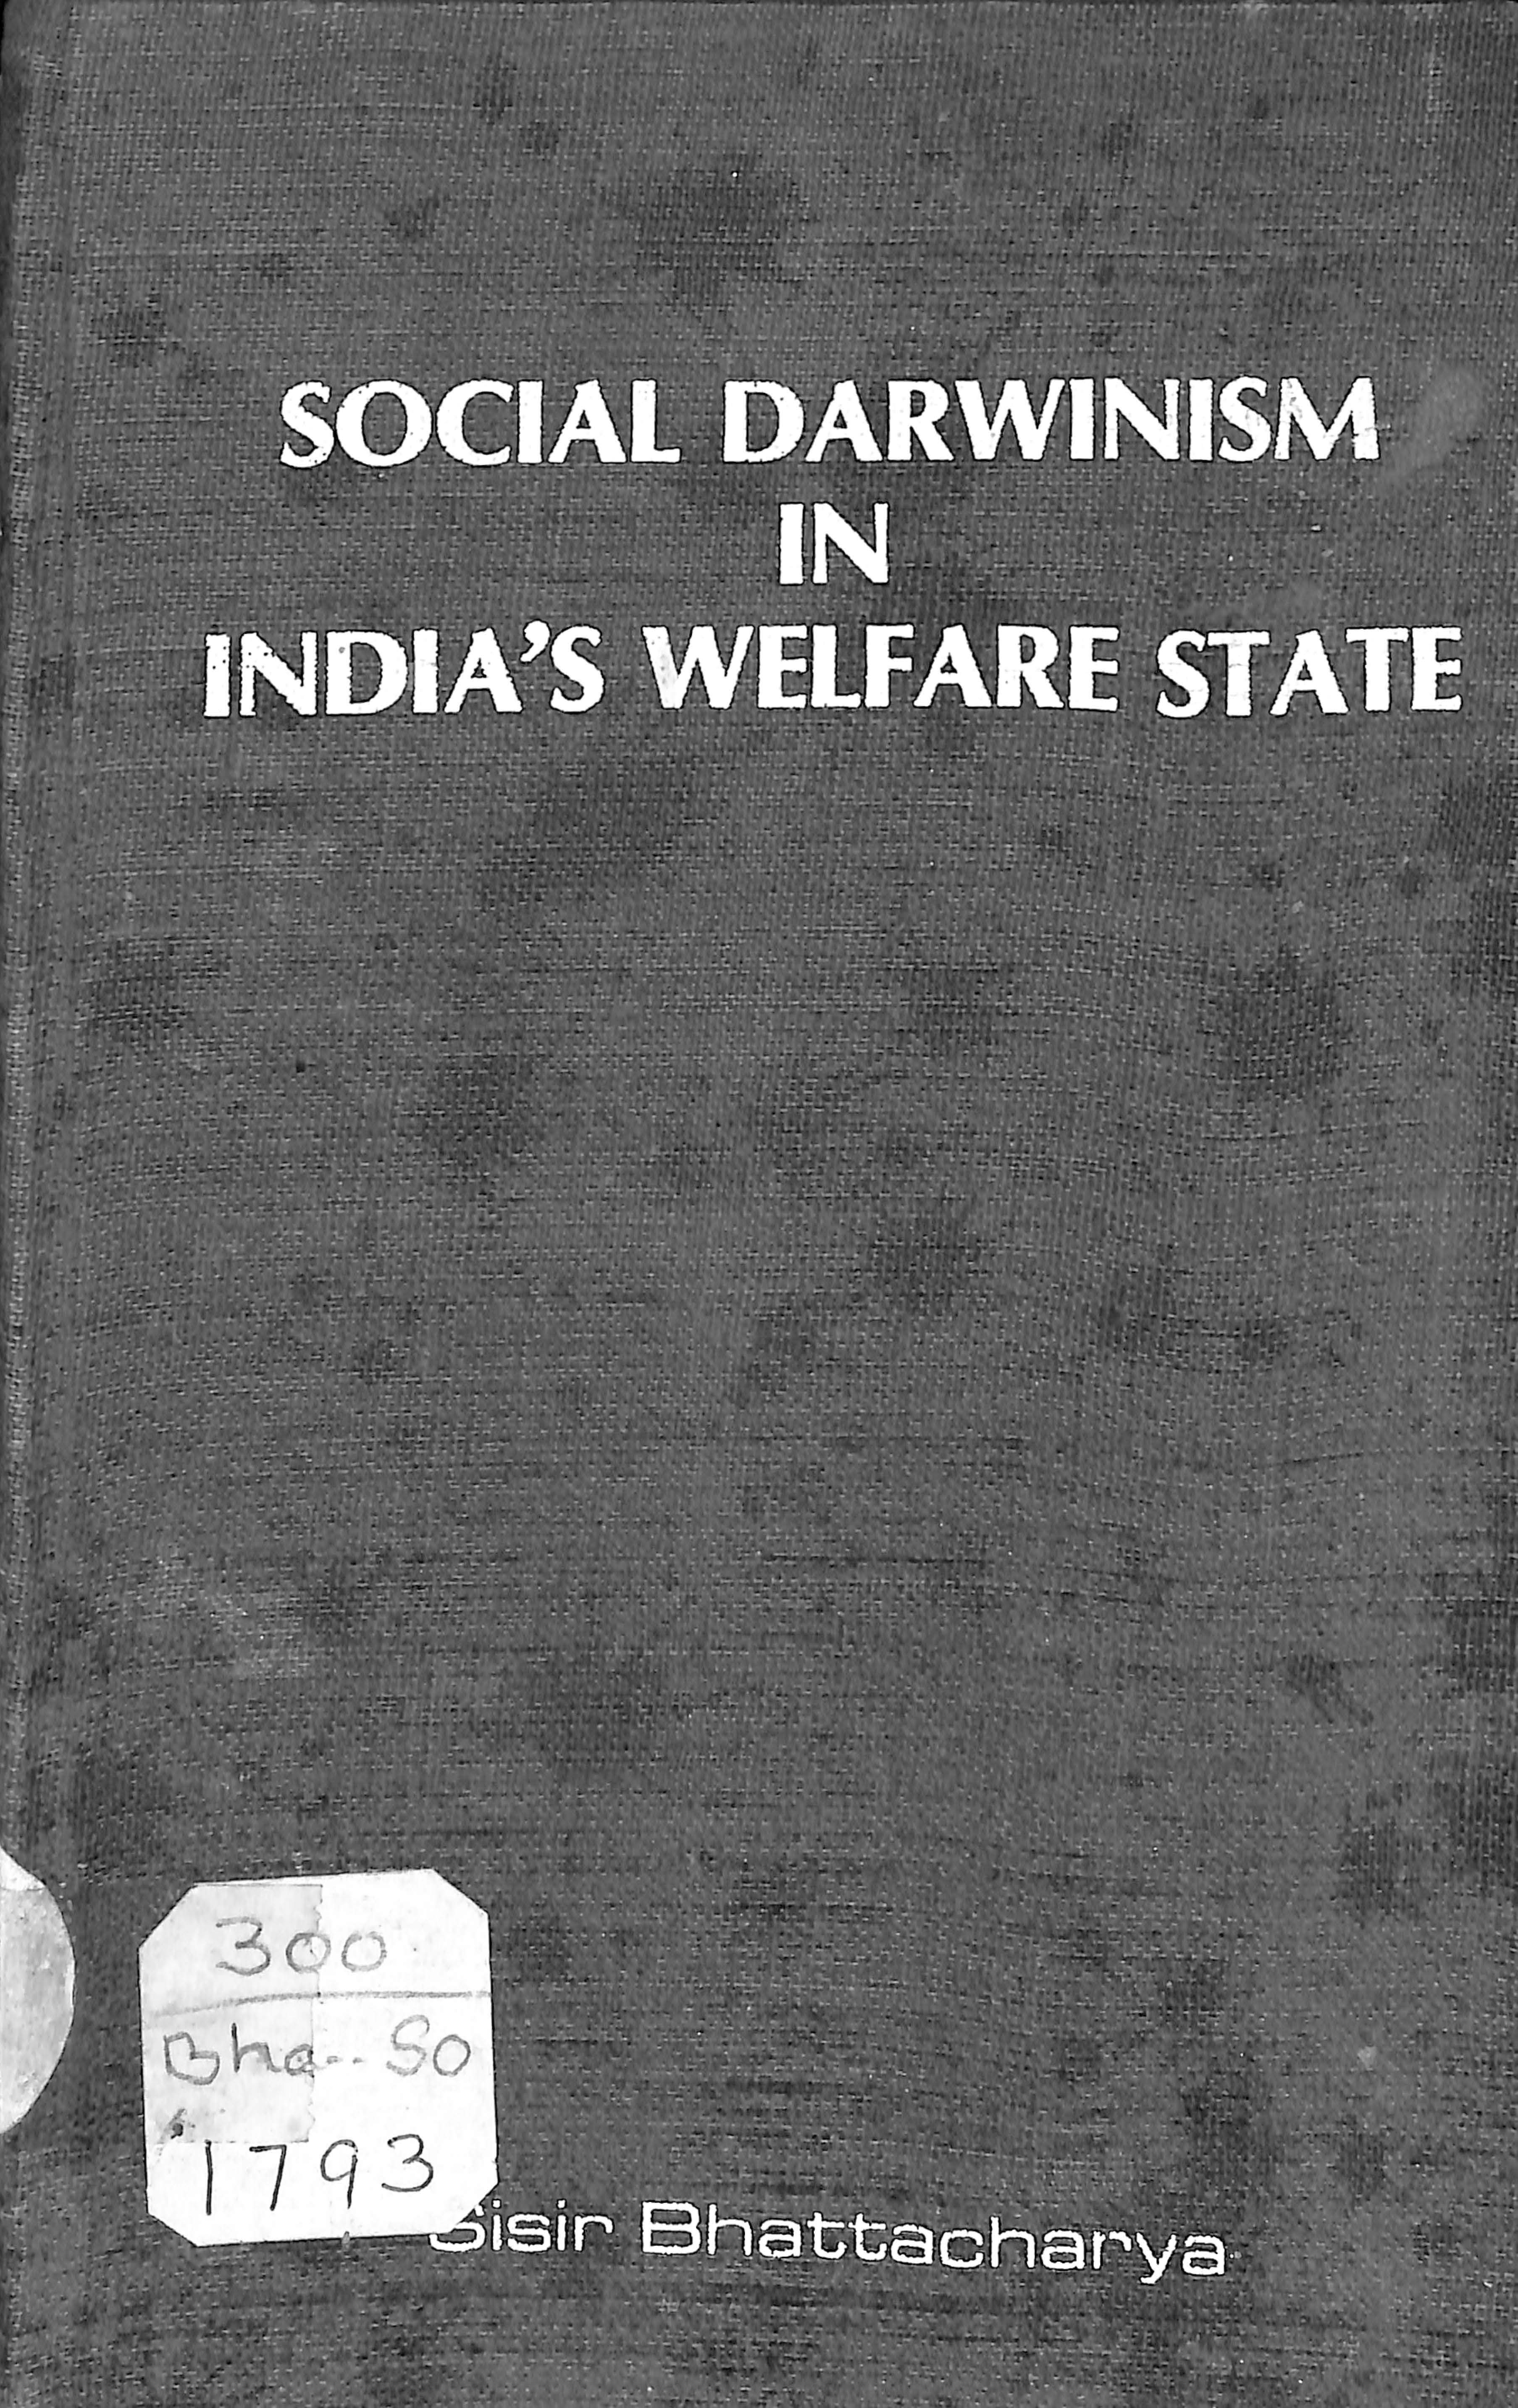 Social Darwinism in india's welfare state